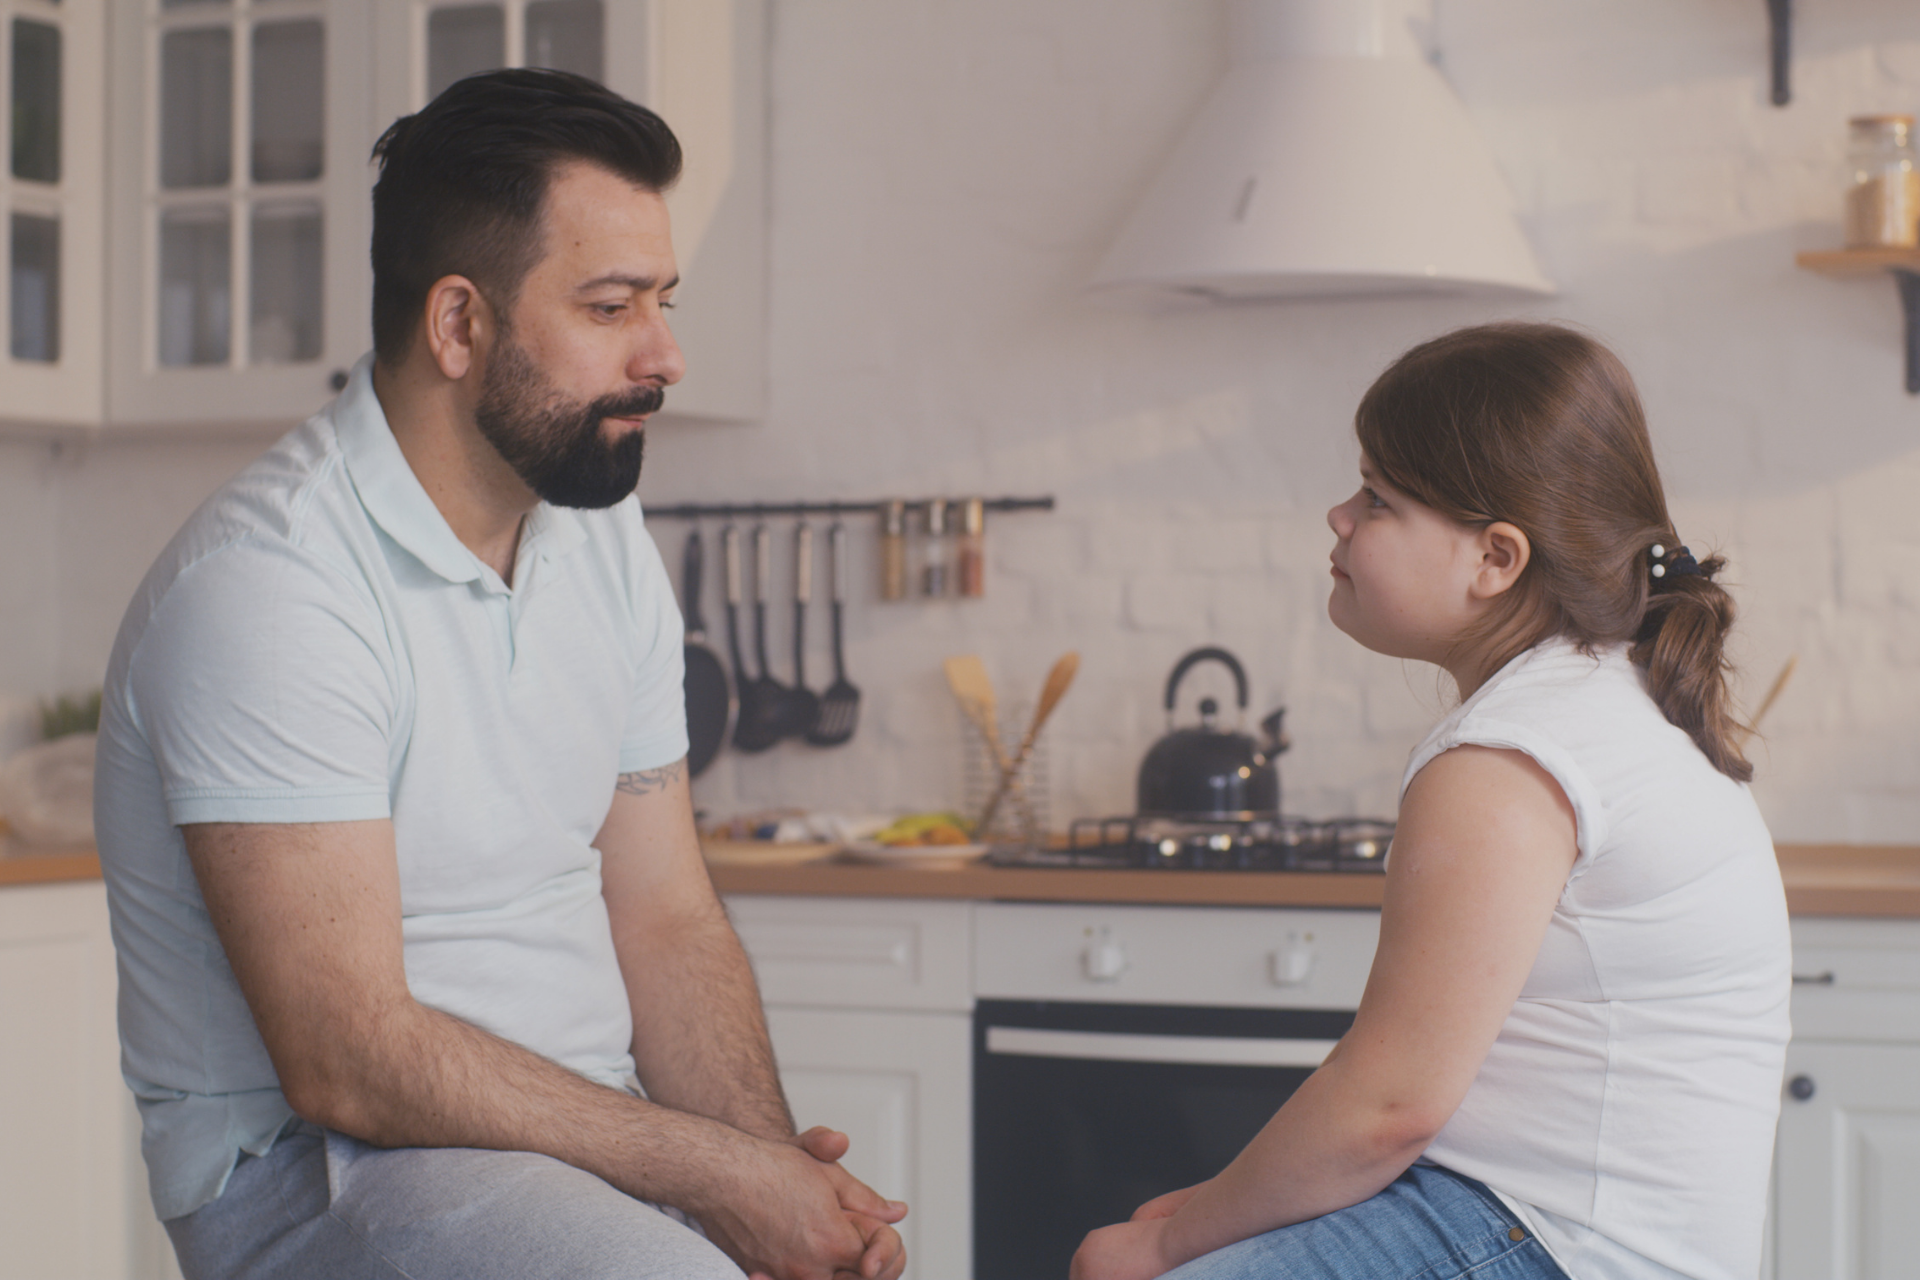 A dad practicing positive parenting by communicating with his daughter